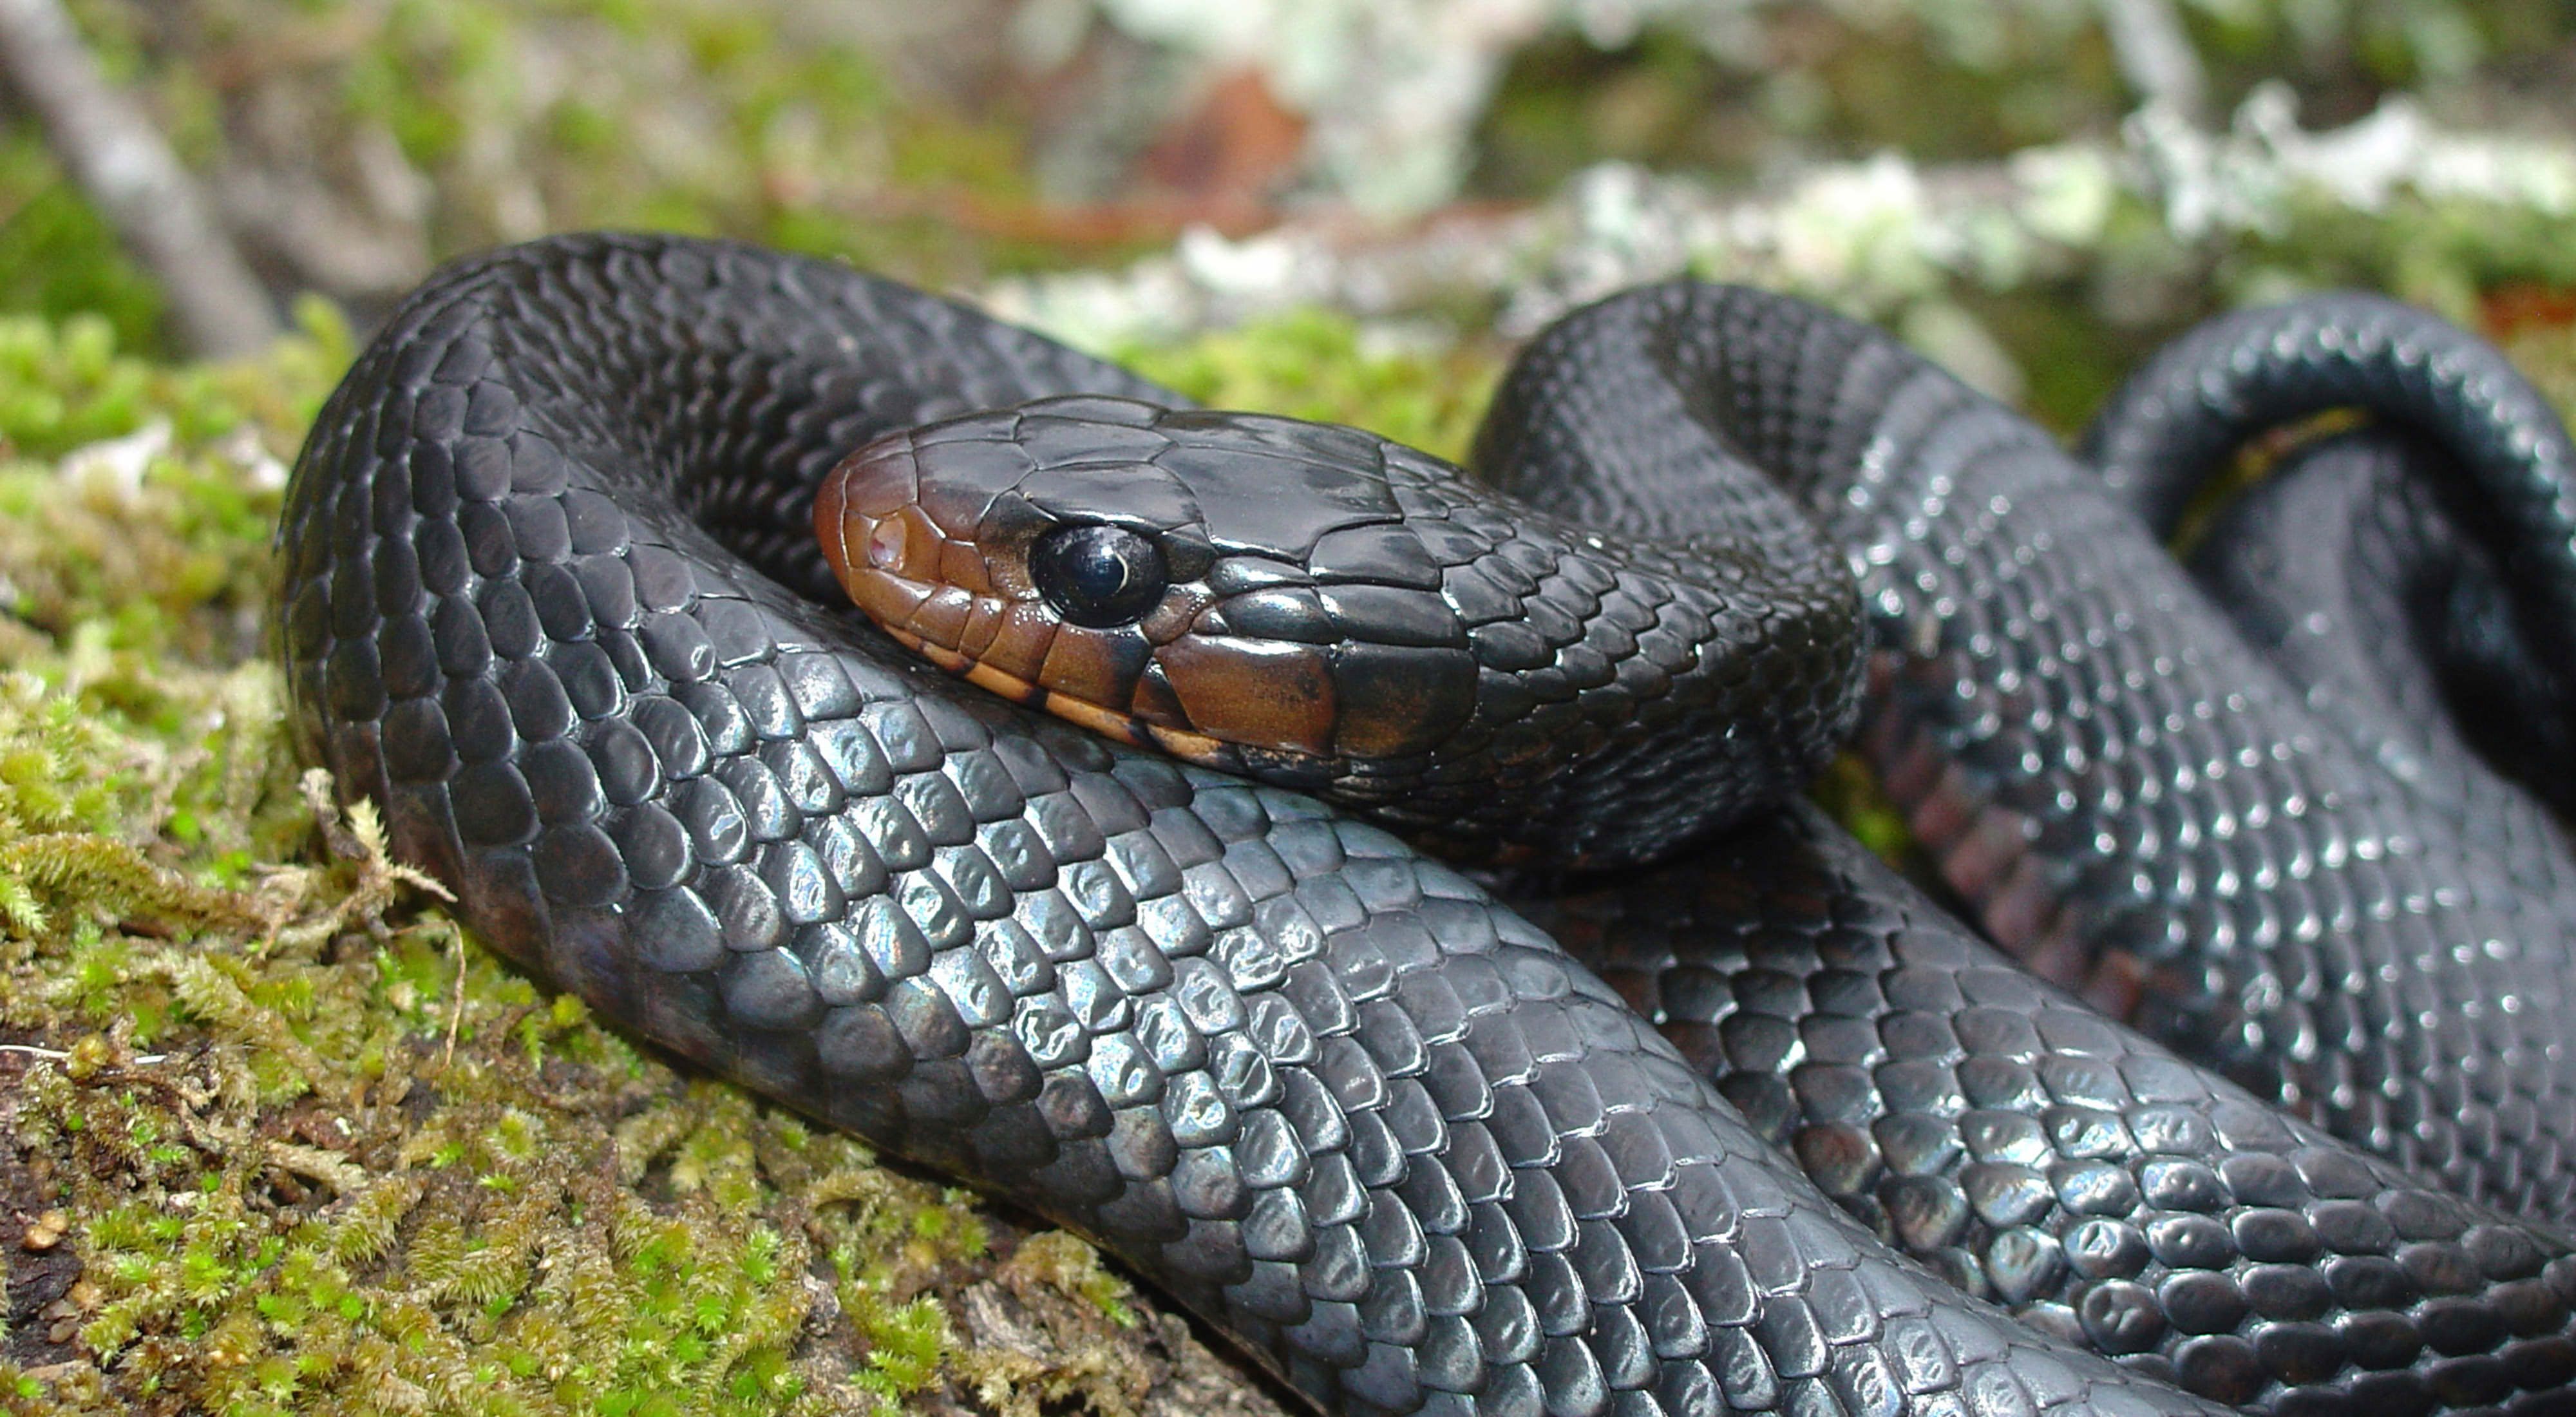 Closeup of a shiny black snake with its head resting on its coiled body.